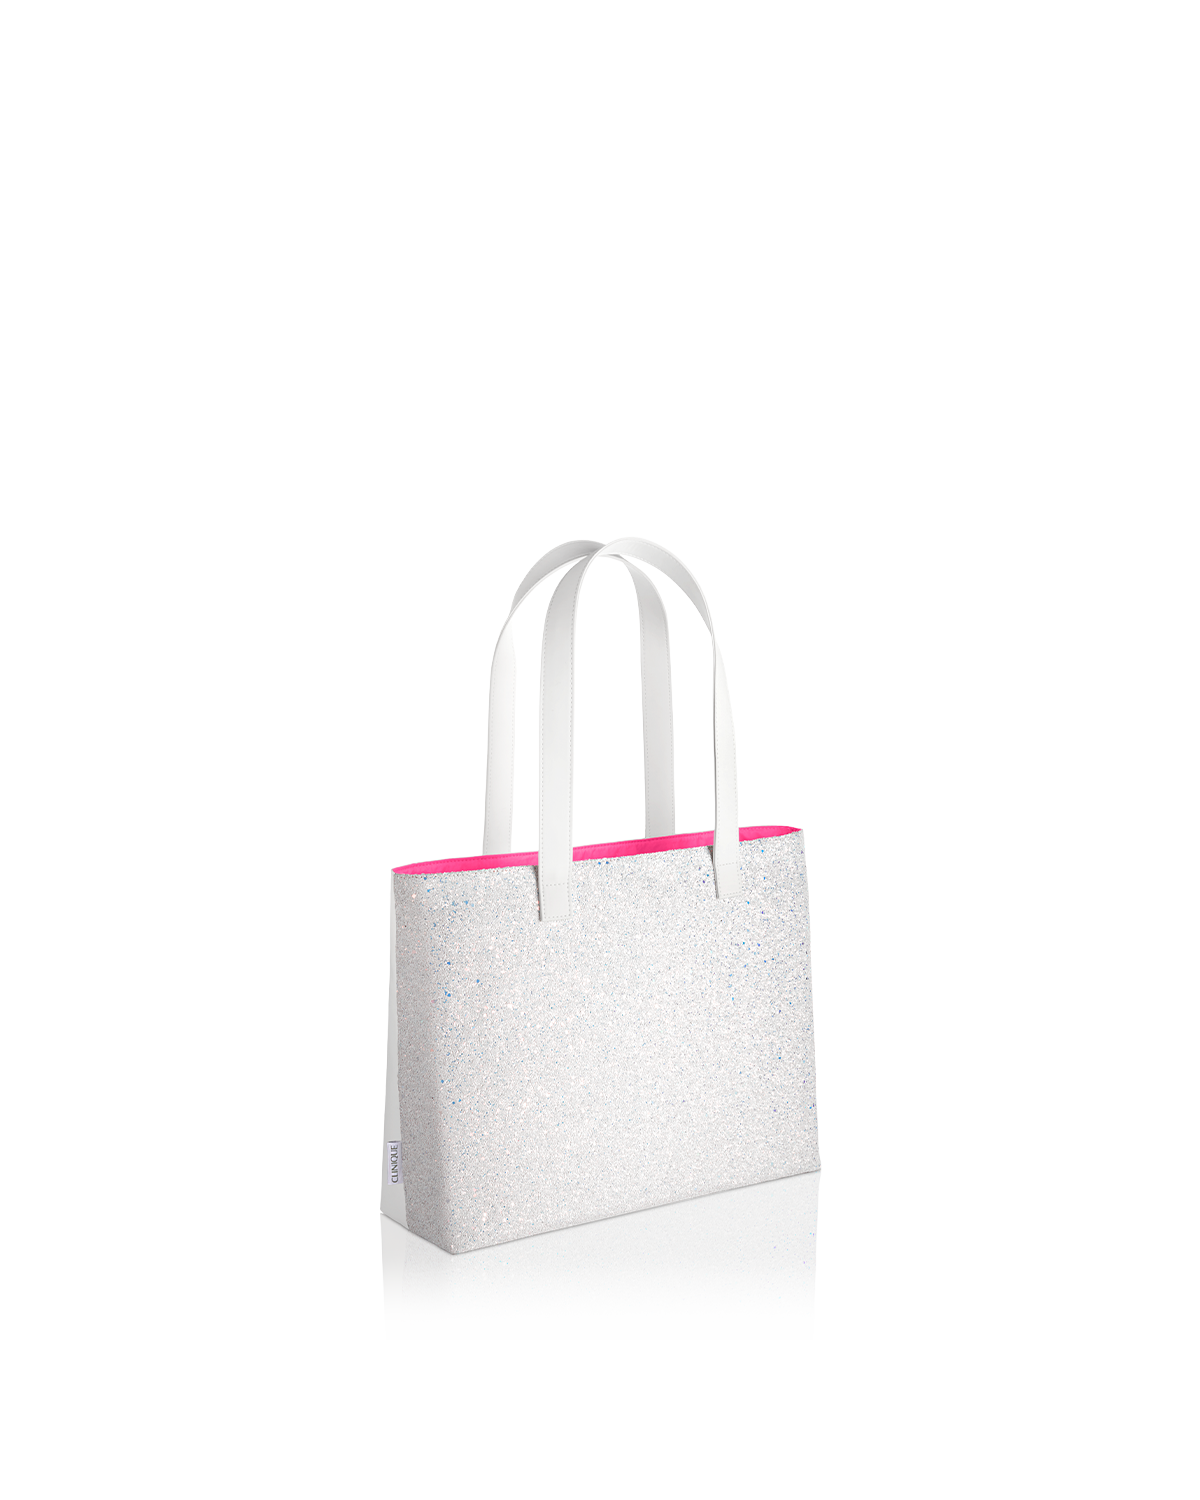 MYO Tote - Glitter/White with Light Pink Lining